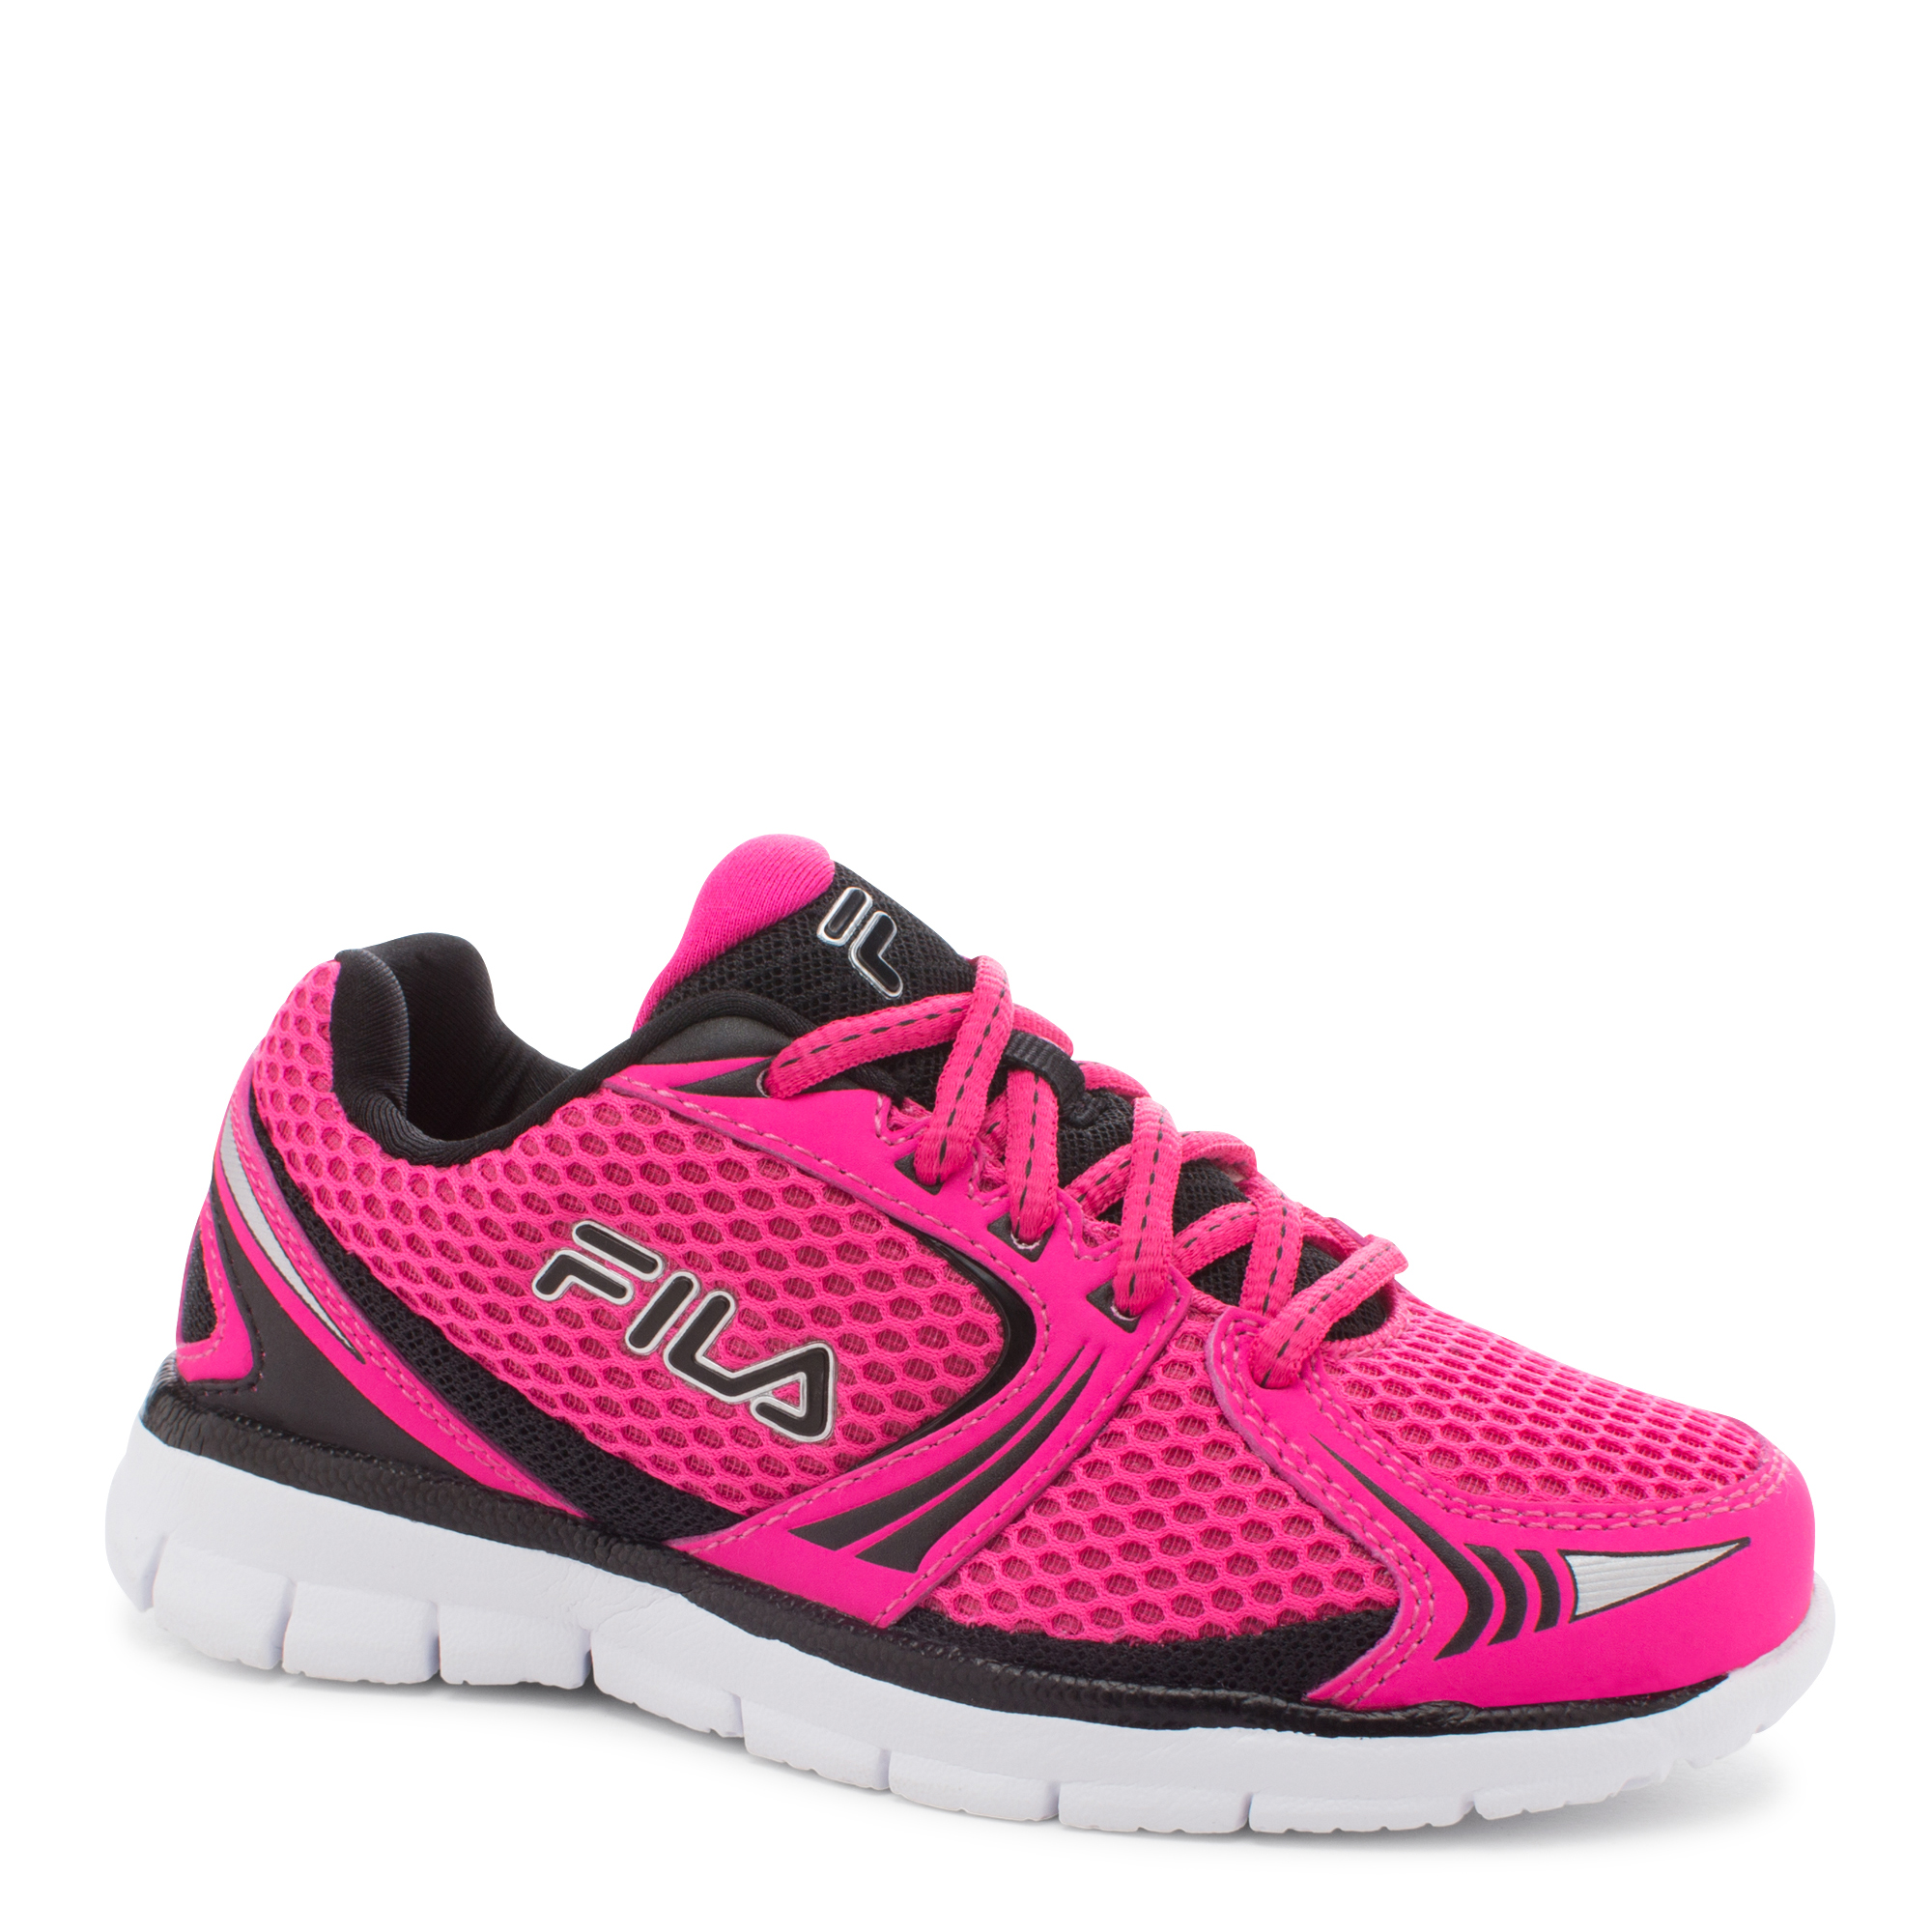 Fila Girl's Luxey Pink/Black Athletic Shoe